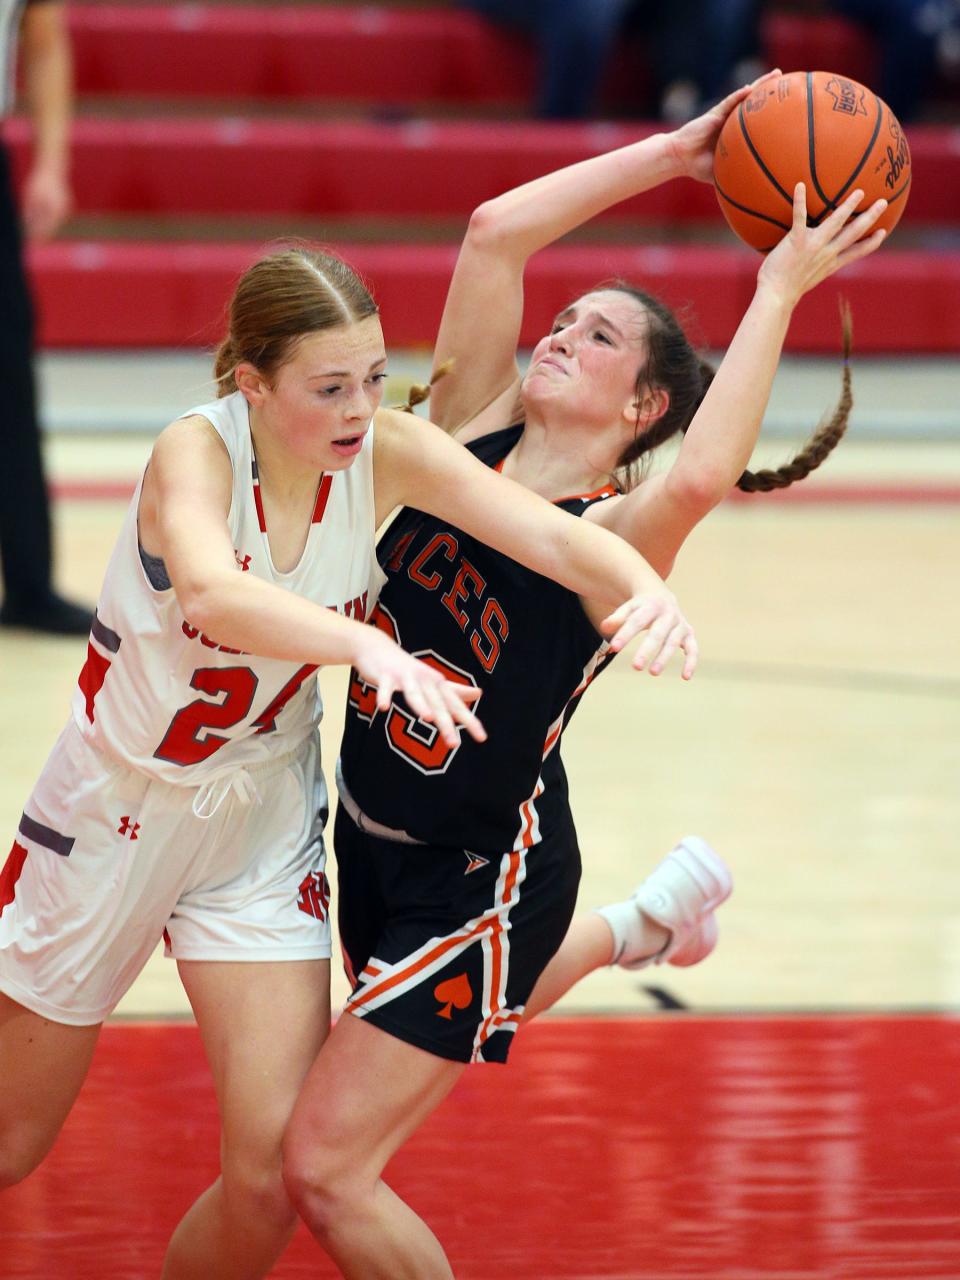 Amanda-Clearcreek sophomore Taylor Evans attempts to slip past Johnstown freshman Amelia Bonito on Wednesday.